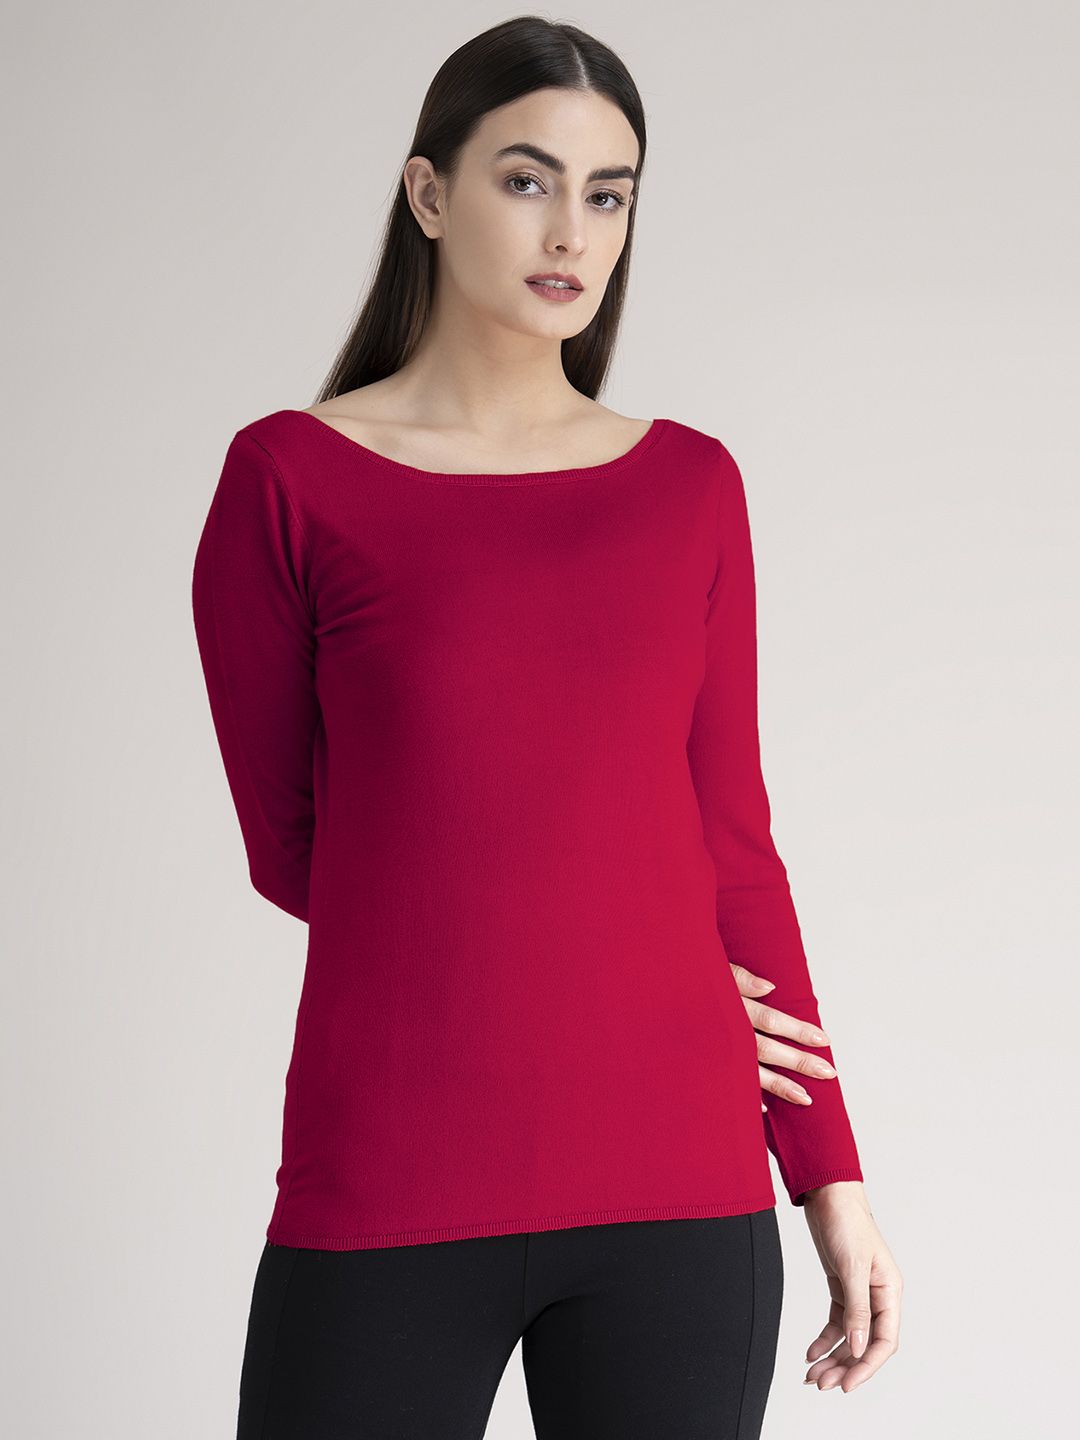 FableStreet Women Magenta Boat Neck Knit Pullover Sweater Price in India